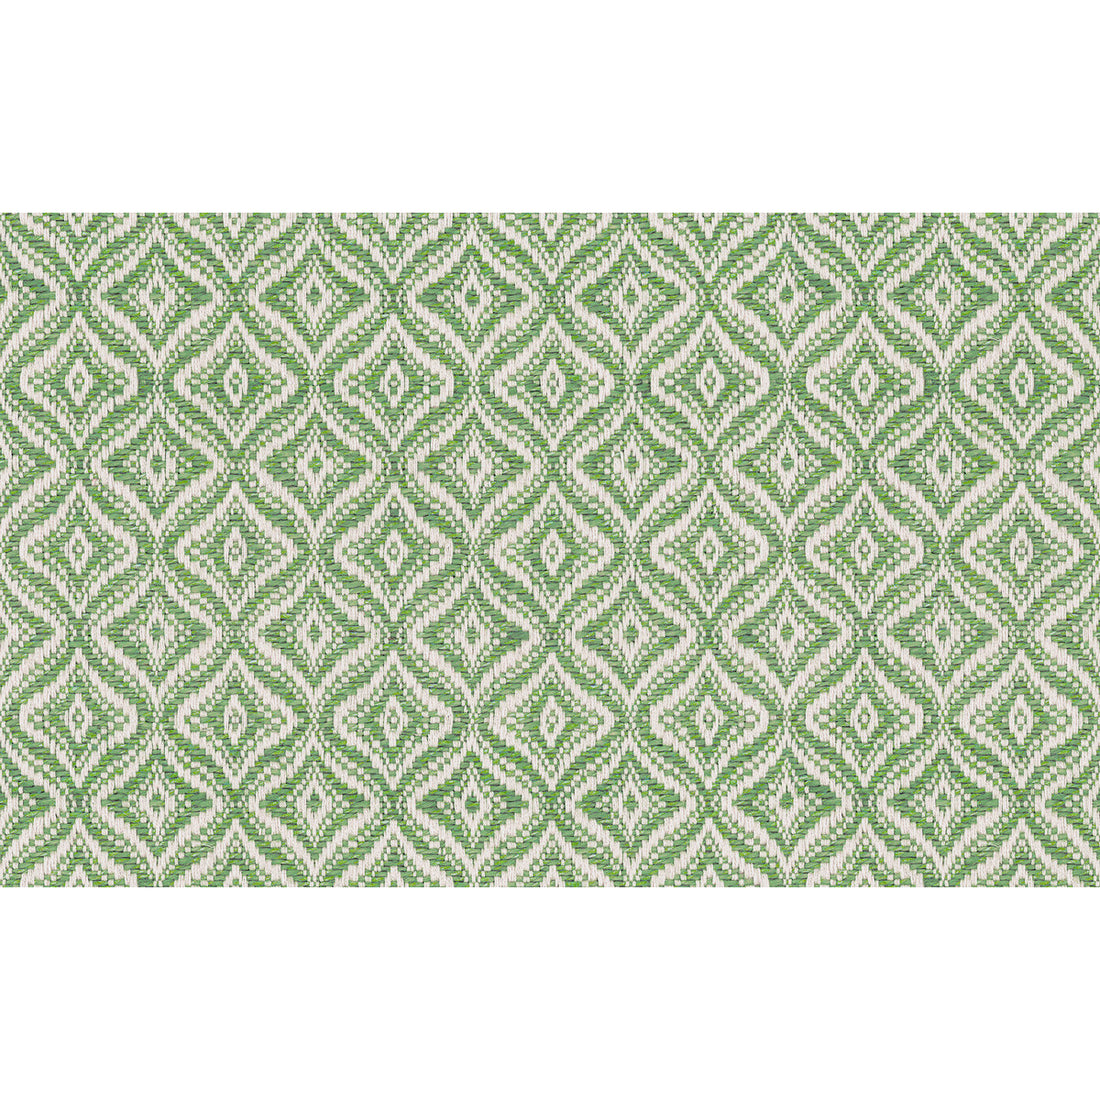 Embrun Woven fabric in apple green color - pattern 8017102.23.0 - by Brunschwig &amp; Fils in the Durance collection